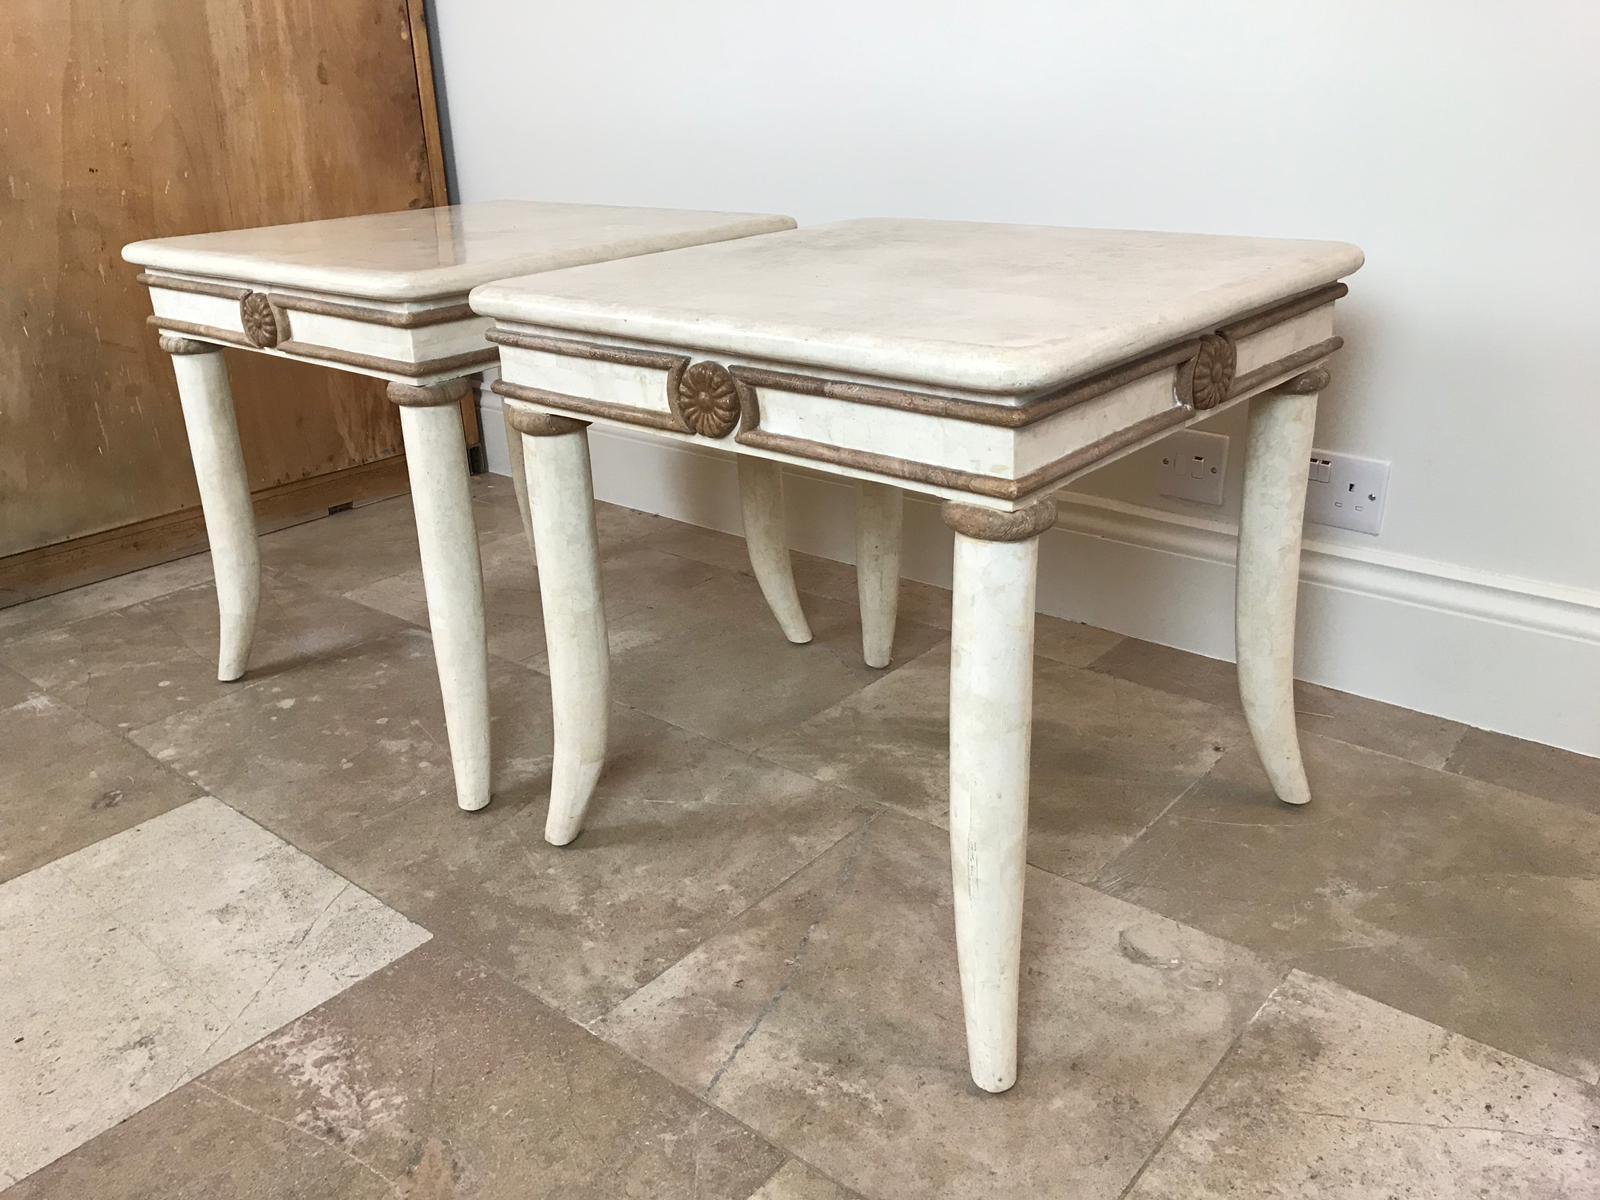 A beautiful pair of ivory colored tessellated stone side tables with light brown contrasting stone detailing and curved legs depicting tusks by the designer Maitland Smith.